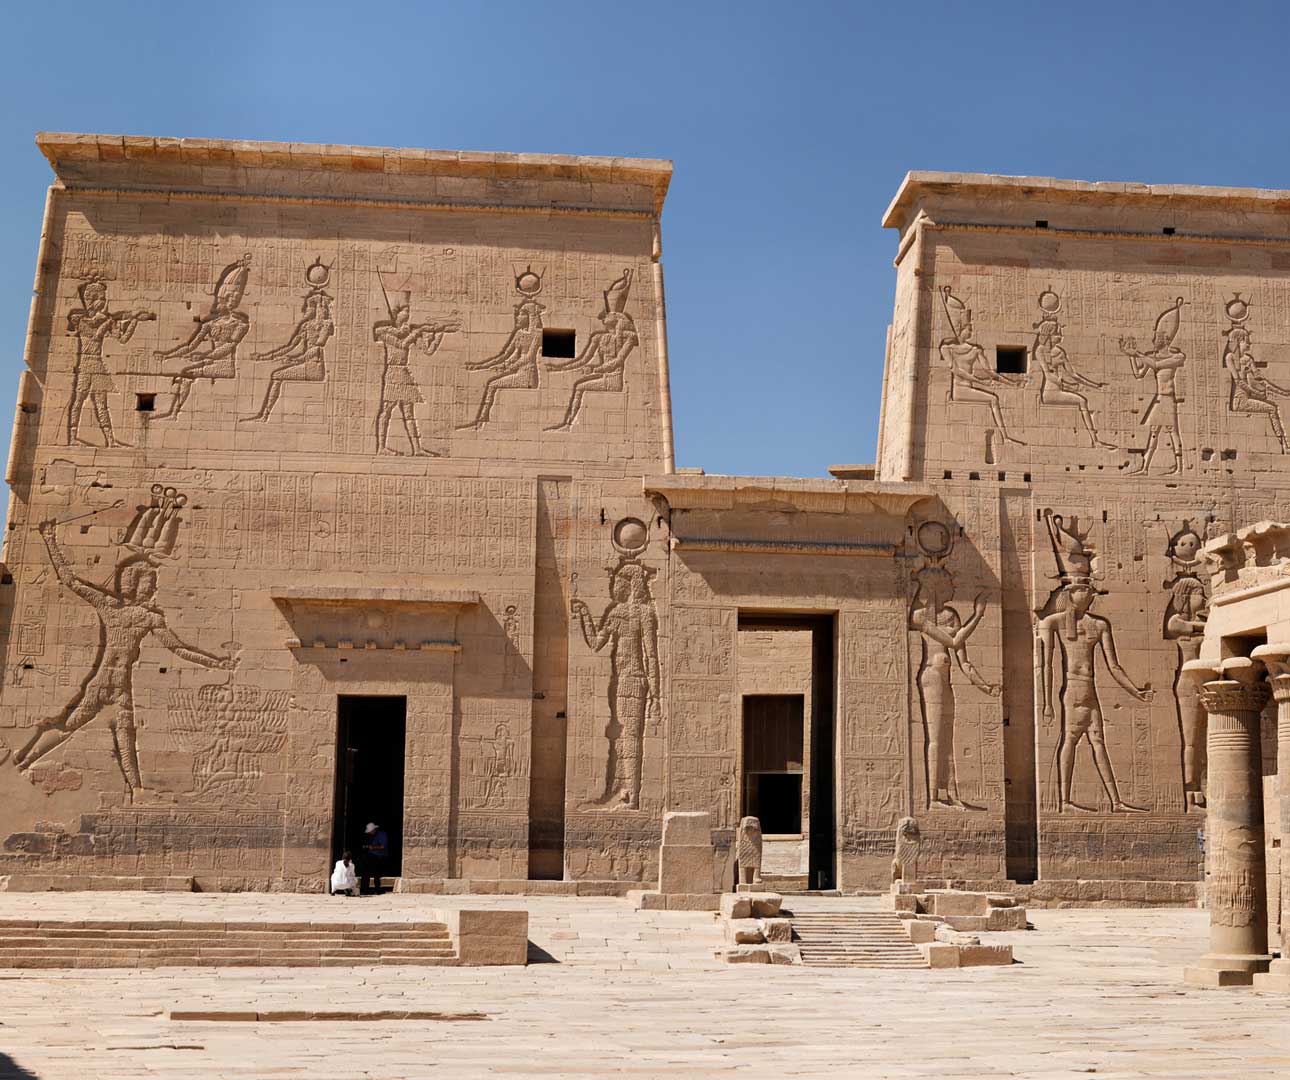 Egyptian Temples